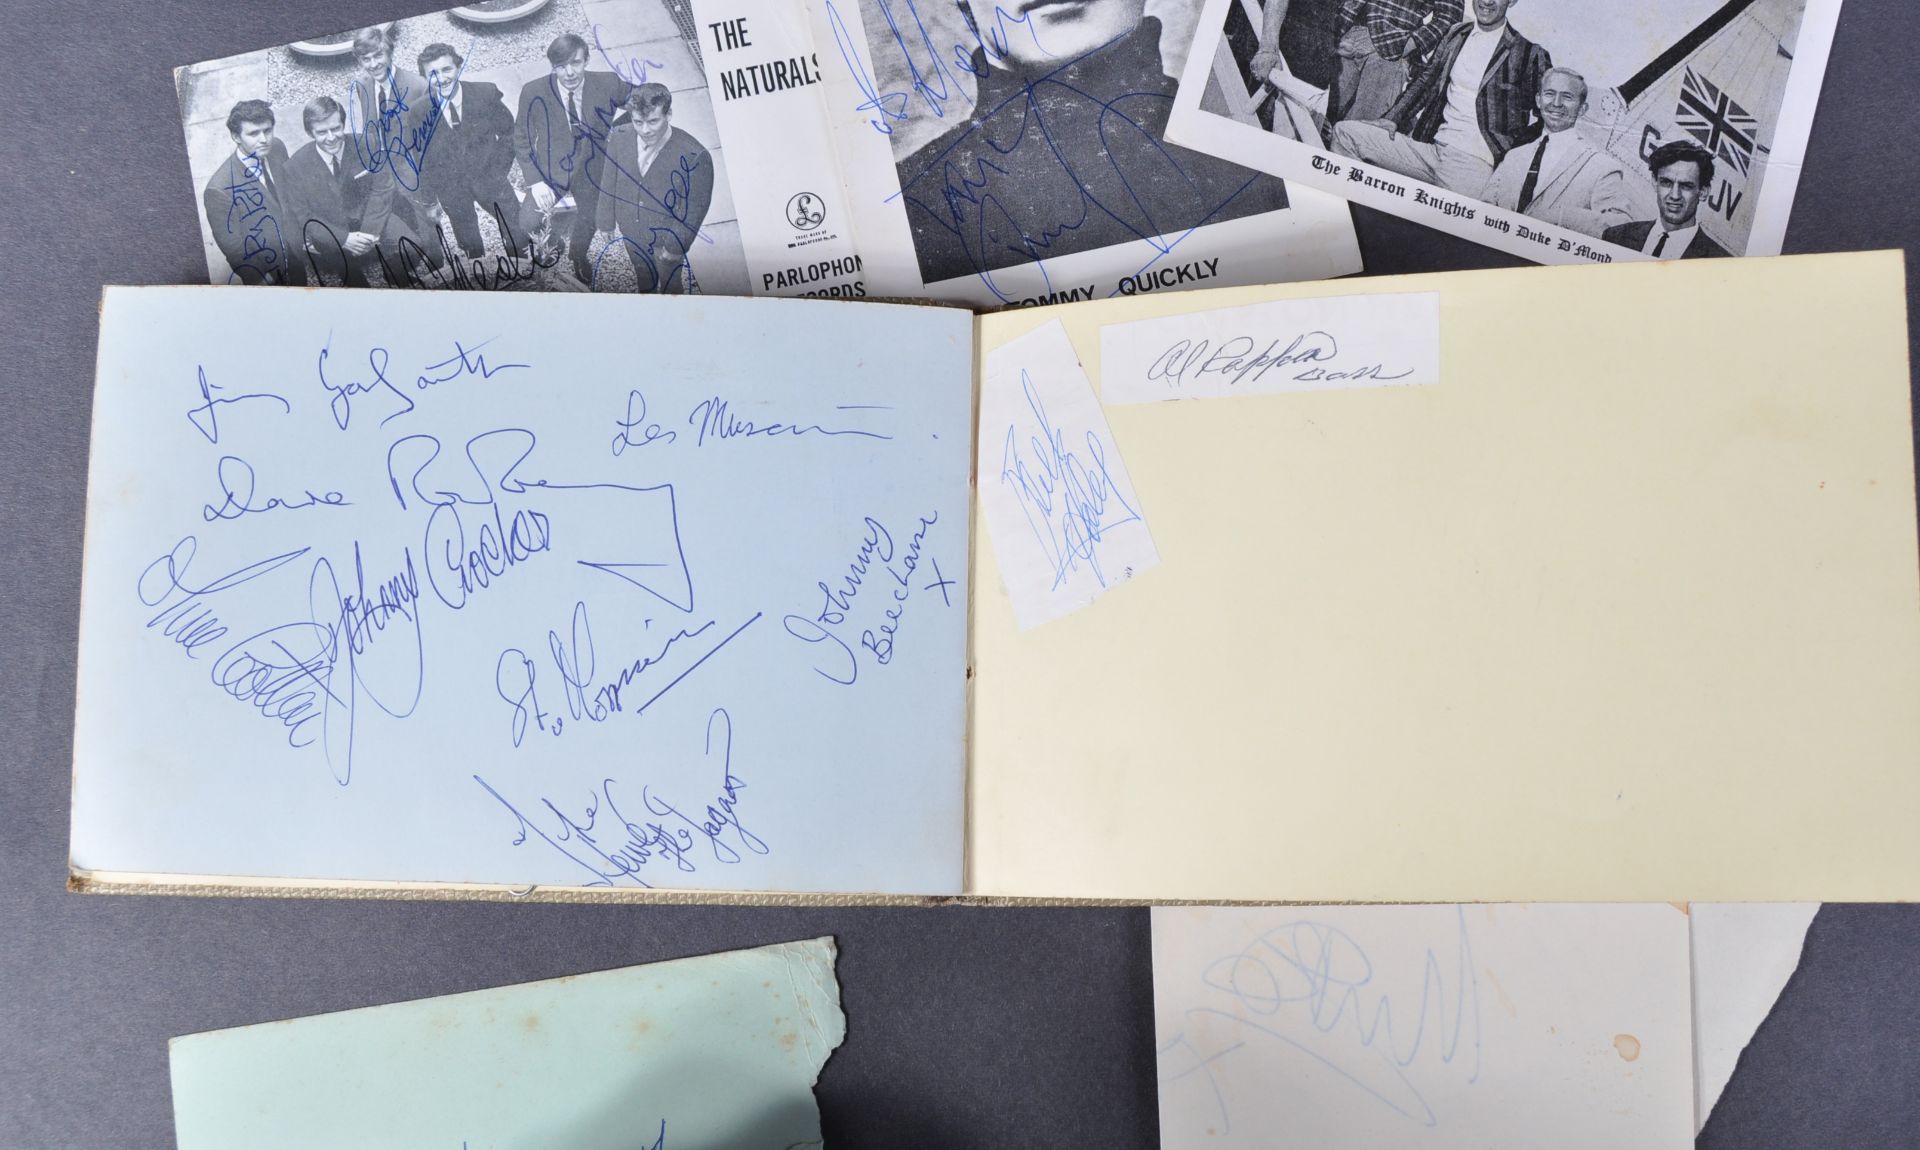 1960S MUSIC AUTOGRAPH ALBUMS - OBTAINED FROM DISCS-A-GOGO - Image 28 of 31